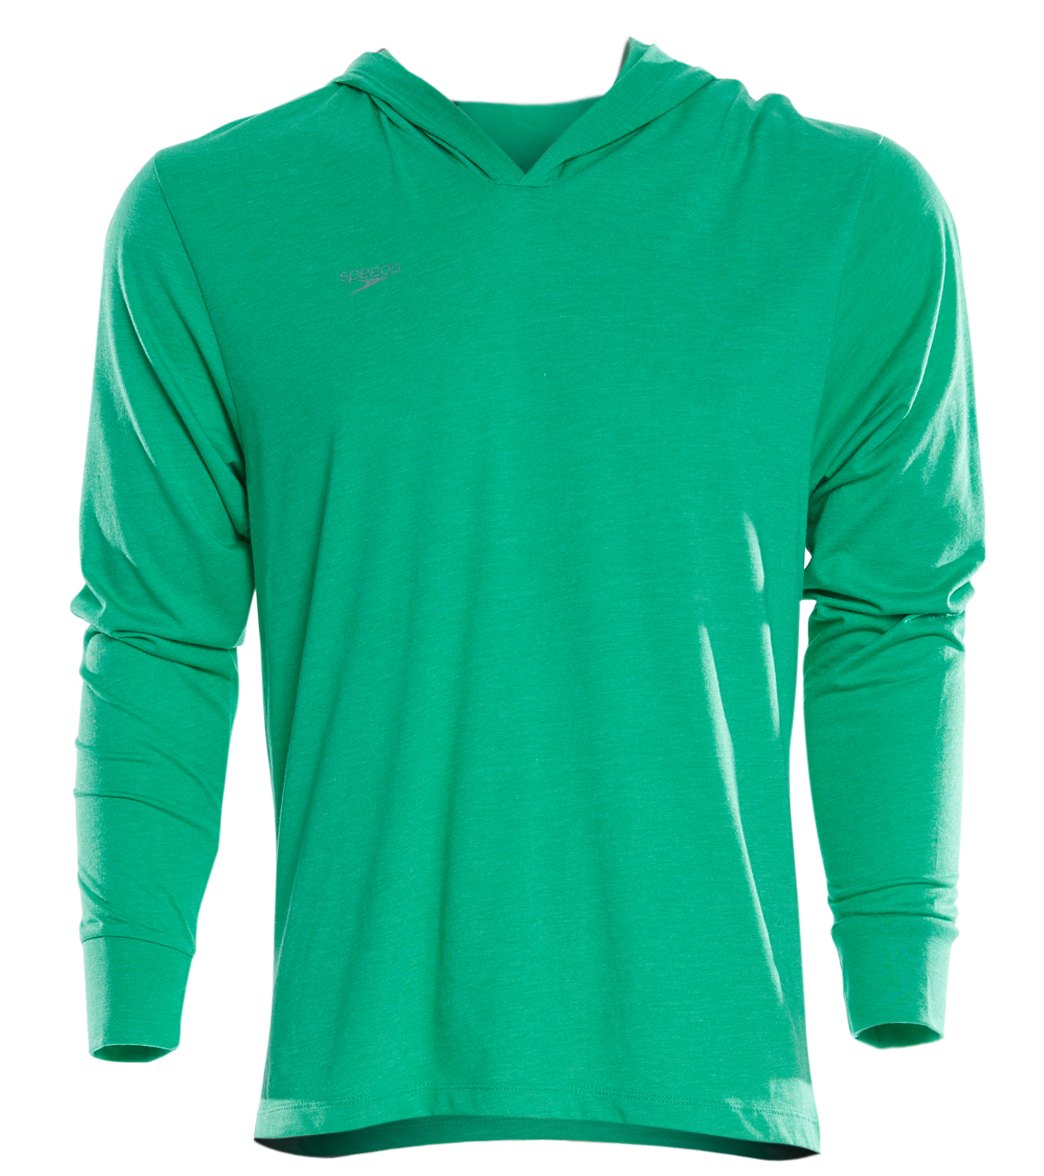 Speedo Men's Pride Pull Over Hoodie Sweatshirt - Green Xs Size X-Small Cotton/Polyester/Rayon - Swimoutlet.com